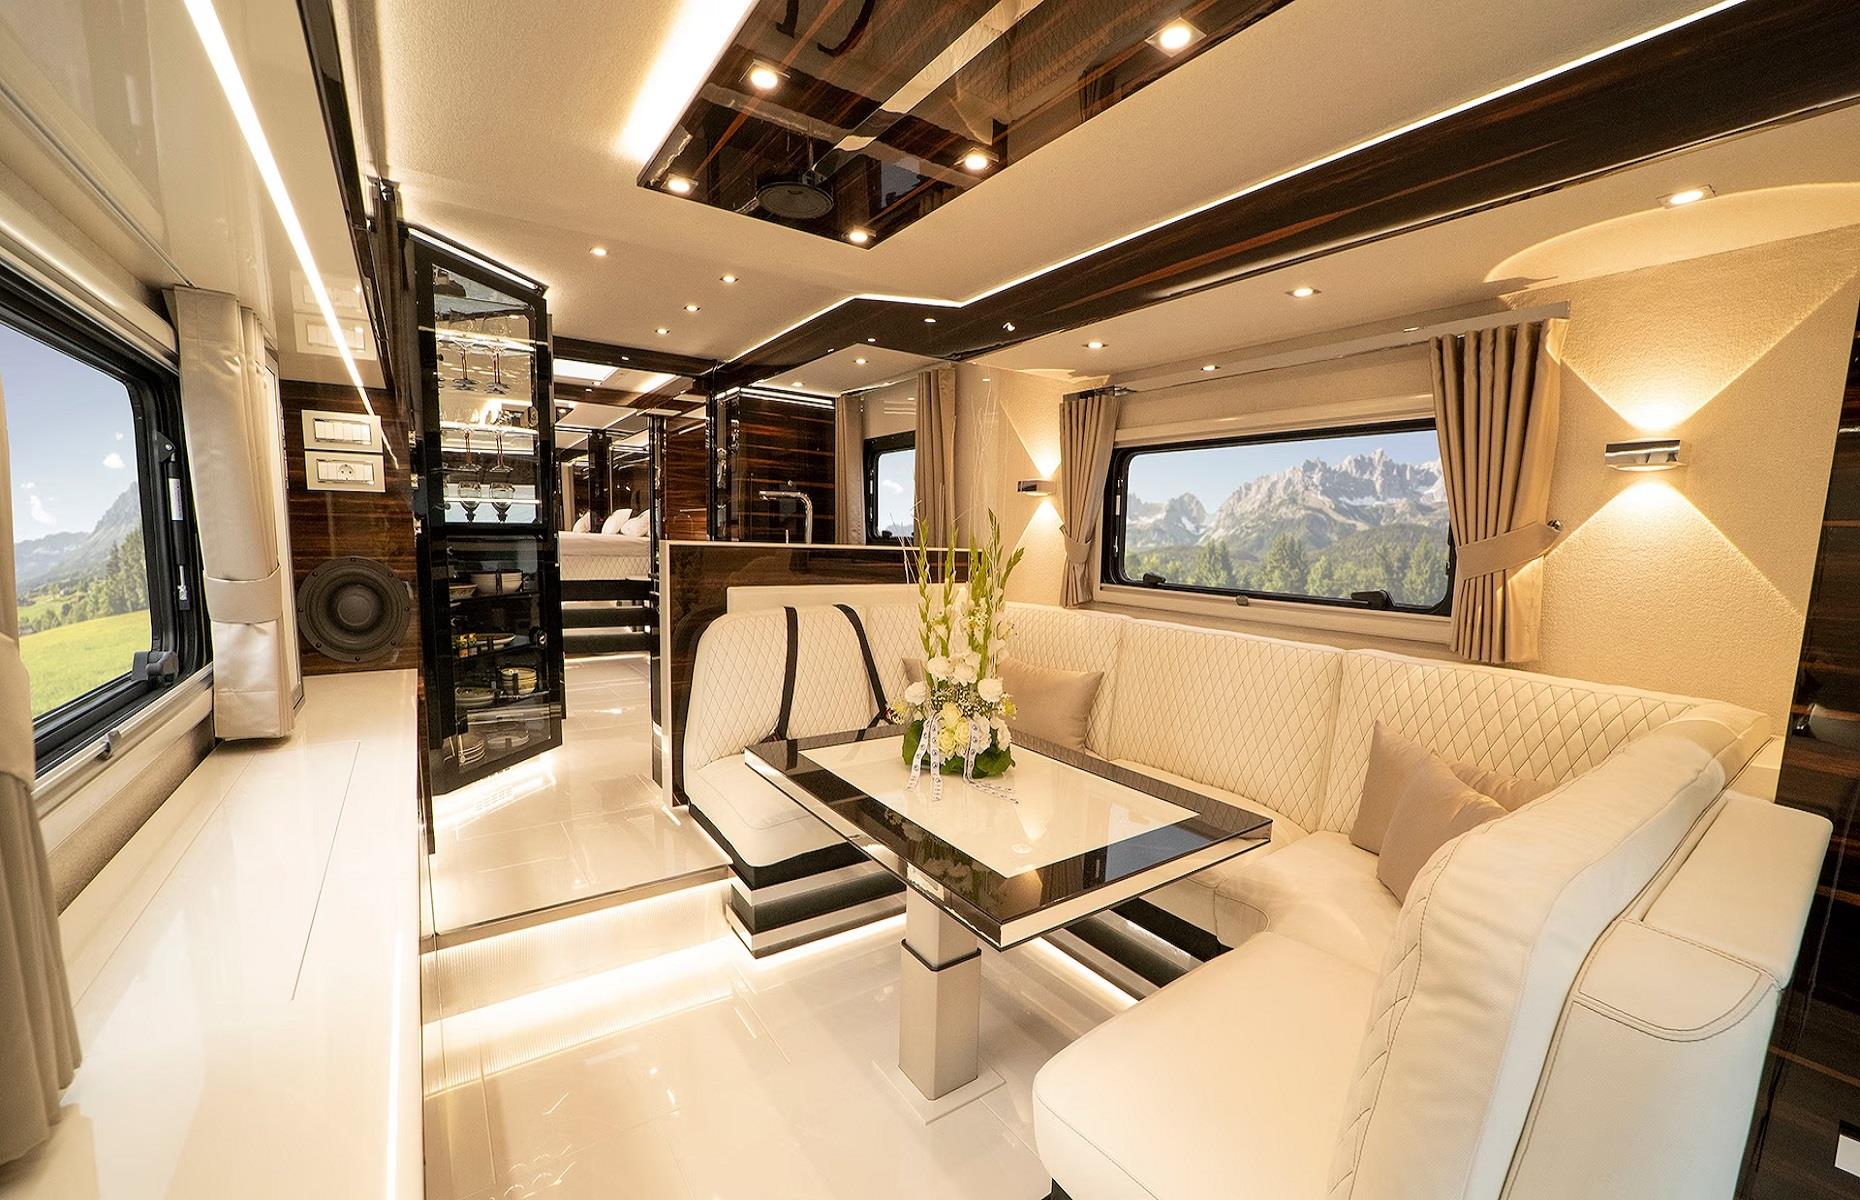 <p>The mobile home’s interior doesn't disappoint, either. Each model can be uniquely altered to suit the needs and tastes of the buyer, with everything from the floorplan to the finishing fabrics fully customisable. That makes this stunning vehicle an exclusive option for the super-rich.</p>